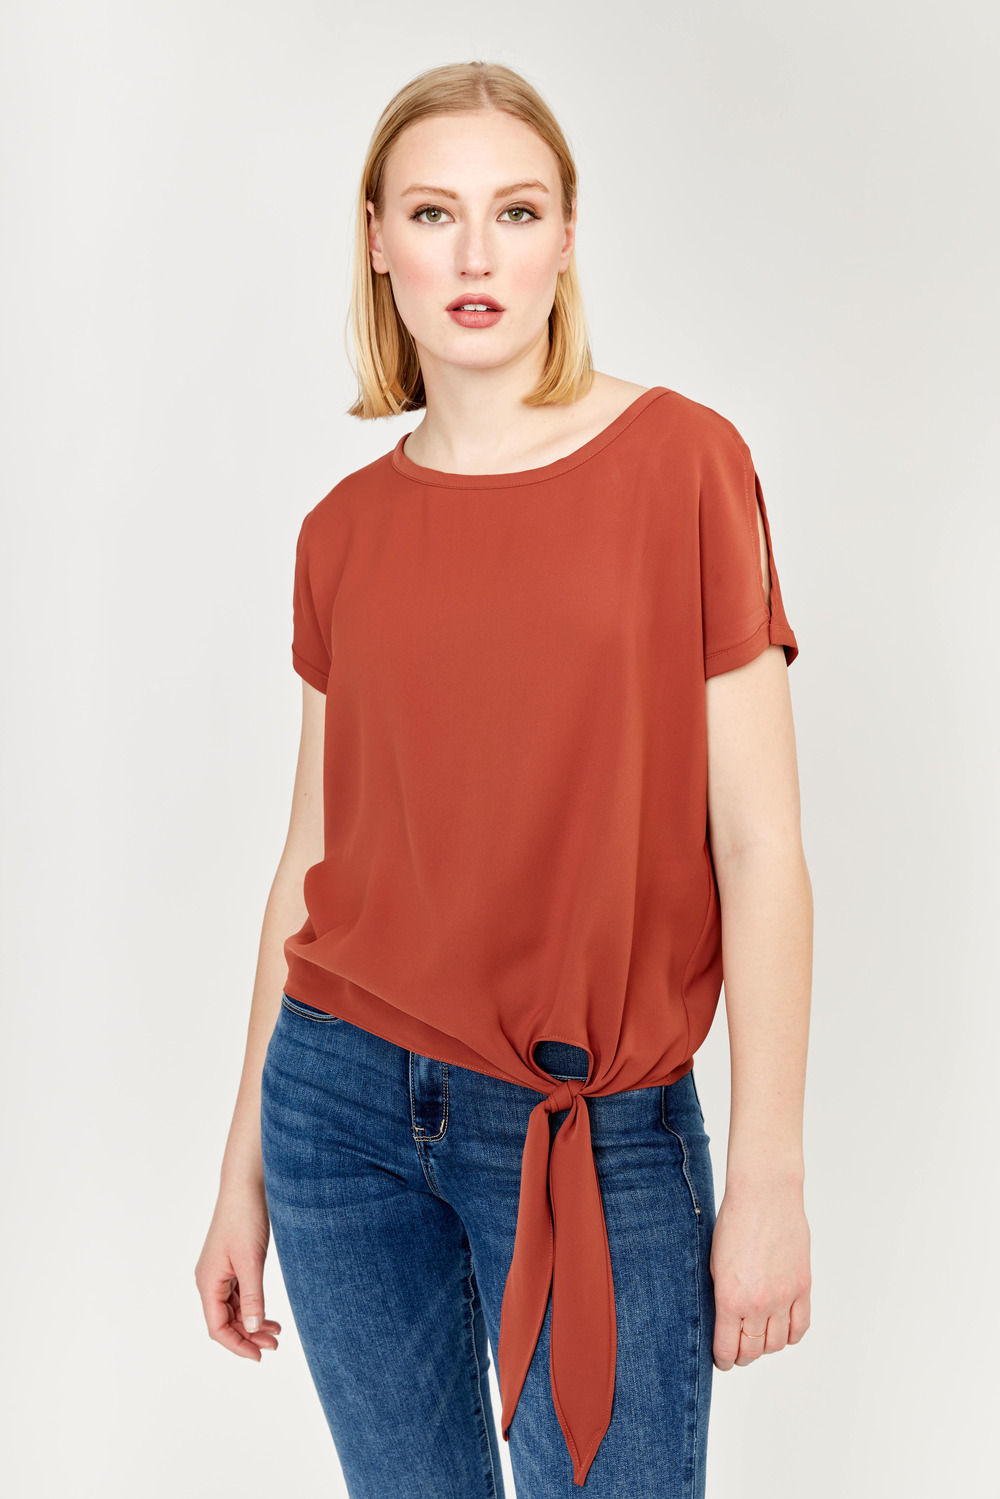 Short Sleeve Tie Front Top Style 181224. Whiskey